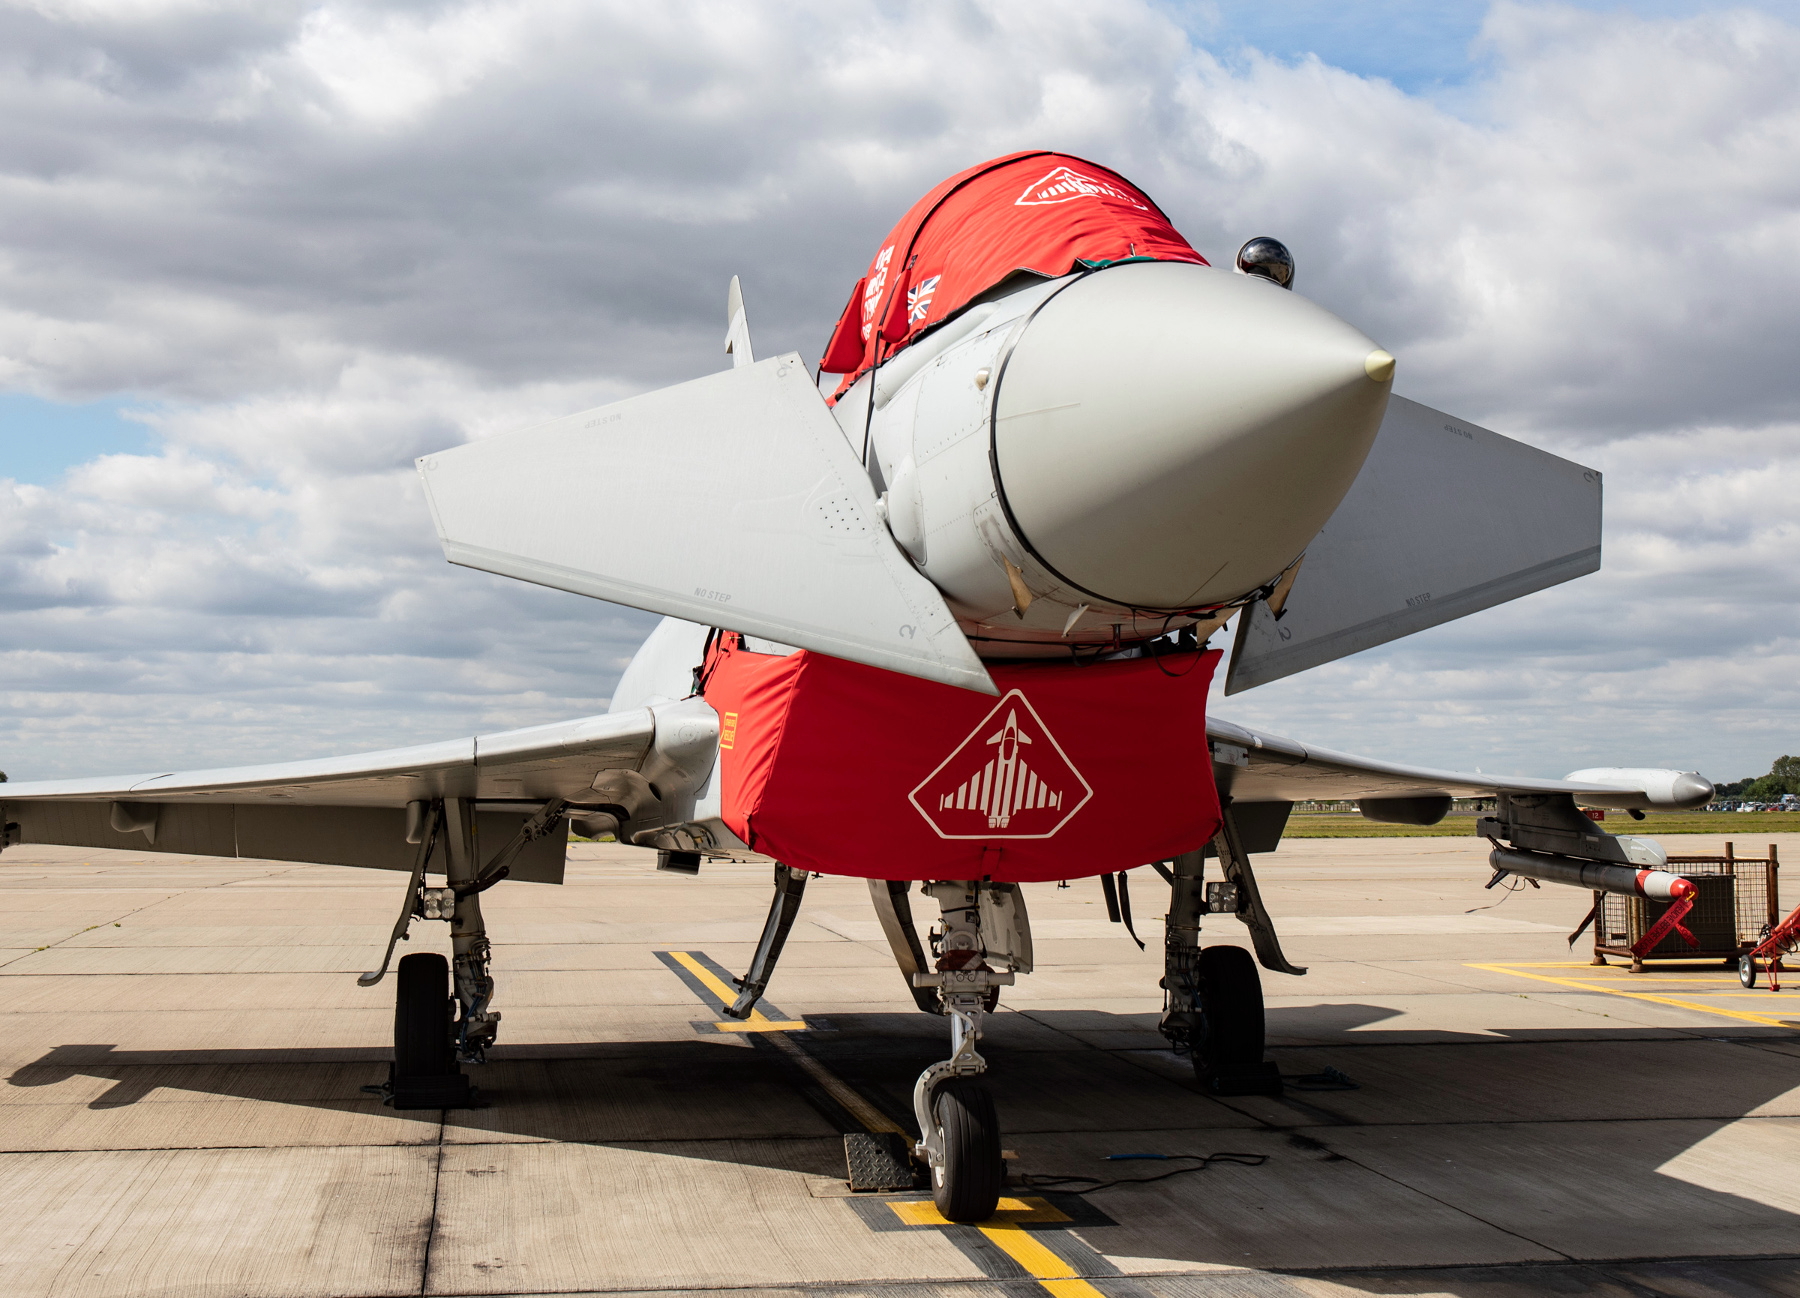 The majority of the RAF Typhoon fleet will sport standard charcoal grey covers, but the Typhoon Display Team aircraft, operated by 29 Squadron at RAF Coningsby, will wear distinctive red covers. Click to enlarge.